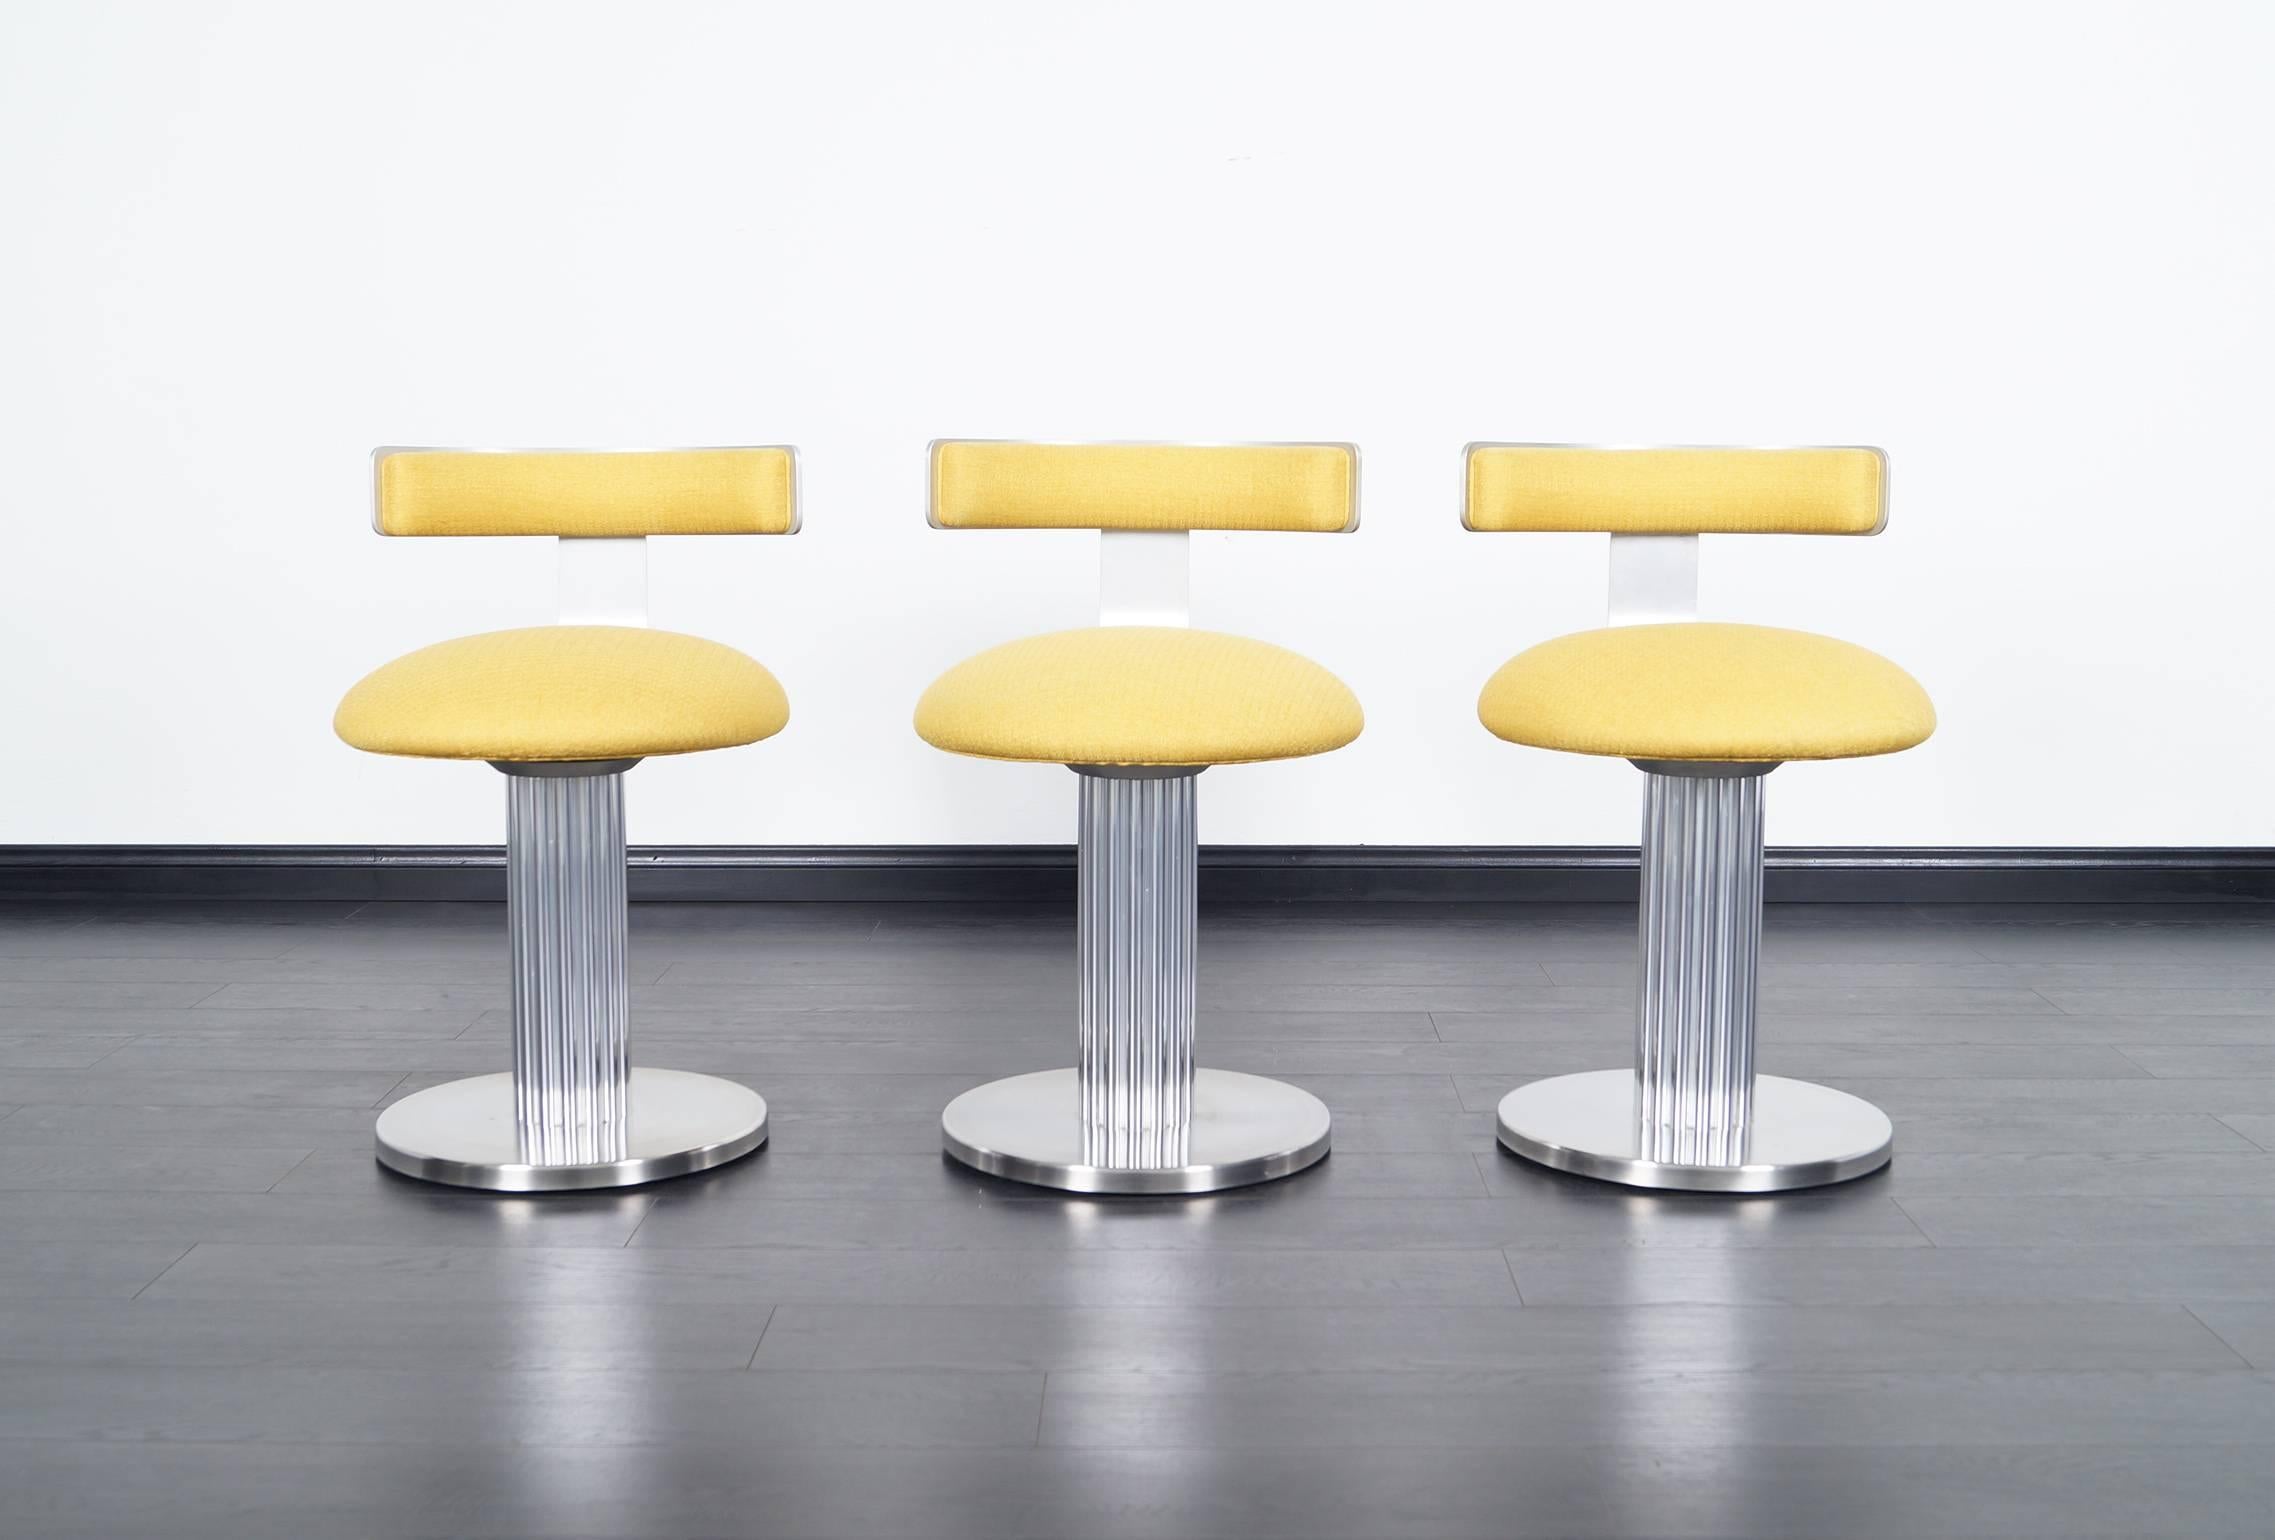 Amazing set of three chrome and brushed steel swivel stools by Design for Leisure. High quality.